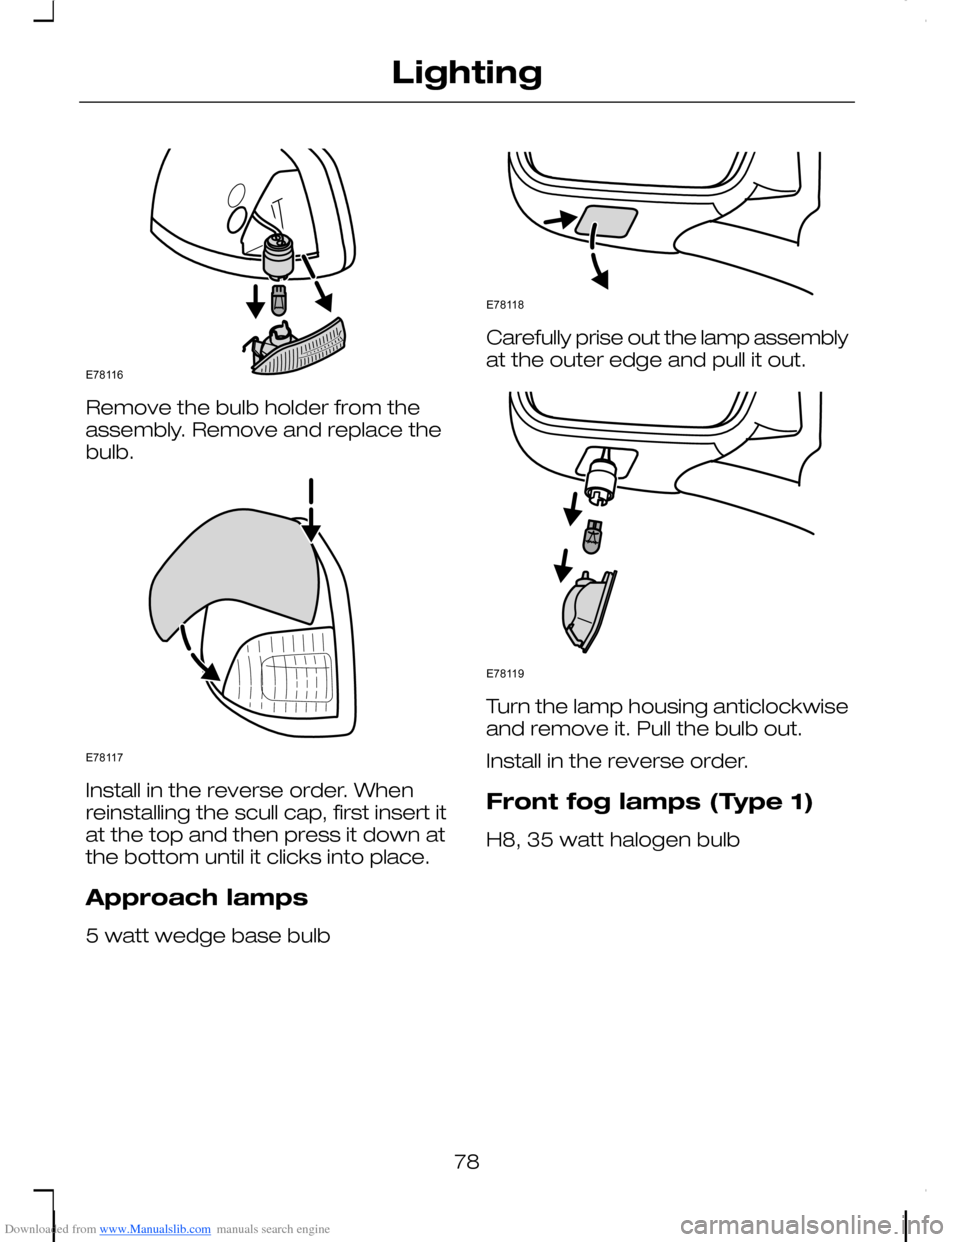 FORD C MAX 2008 1.G Manual PDF Downloaded from www.Manualslib.com manuals search engine Remove the bulb holder from theassembly. Remove and replace thebulb.
Install in the reverse order. Whenreinstalling the scull cap, first insert